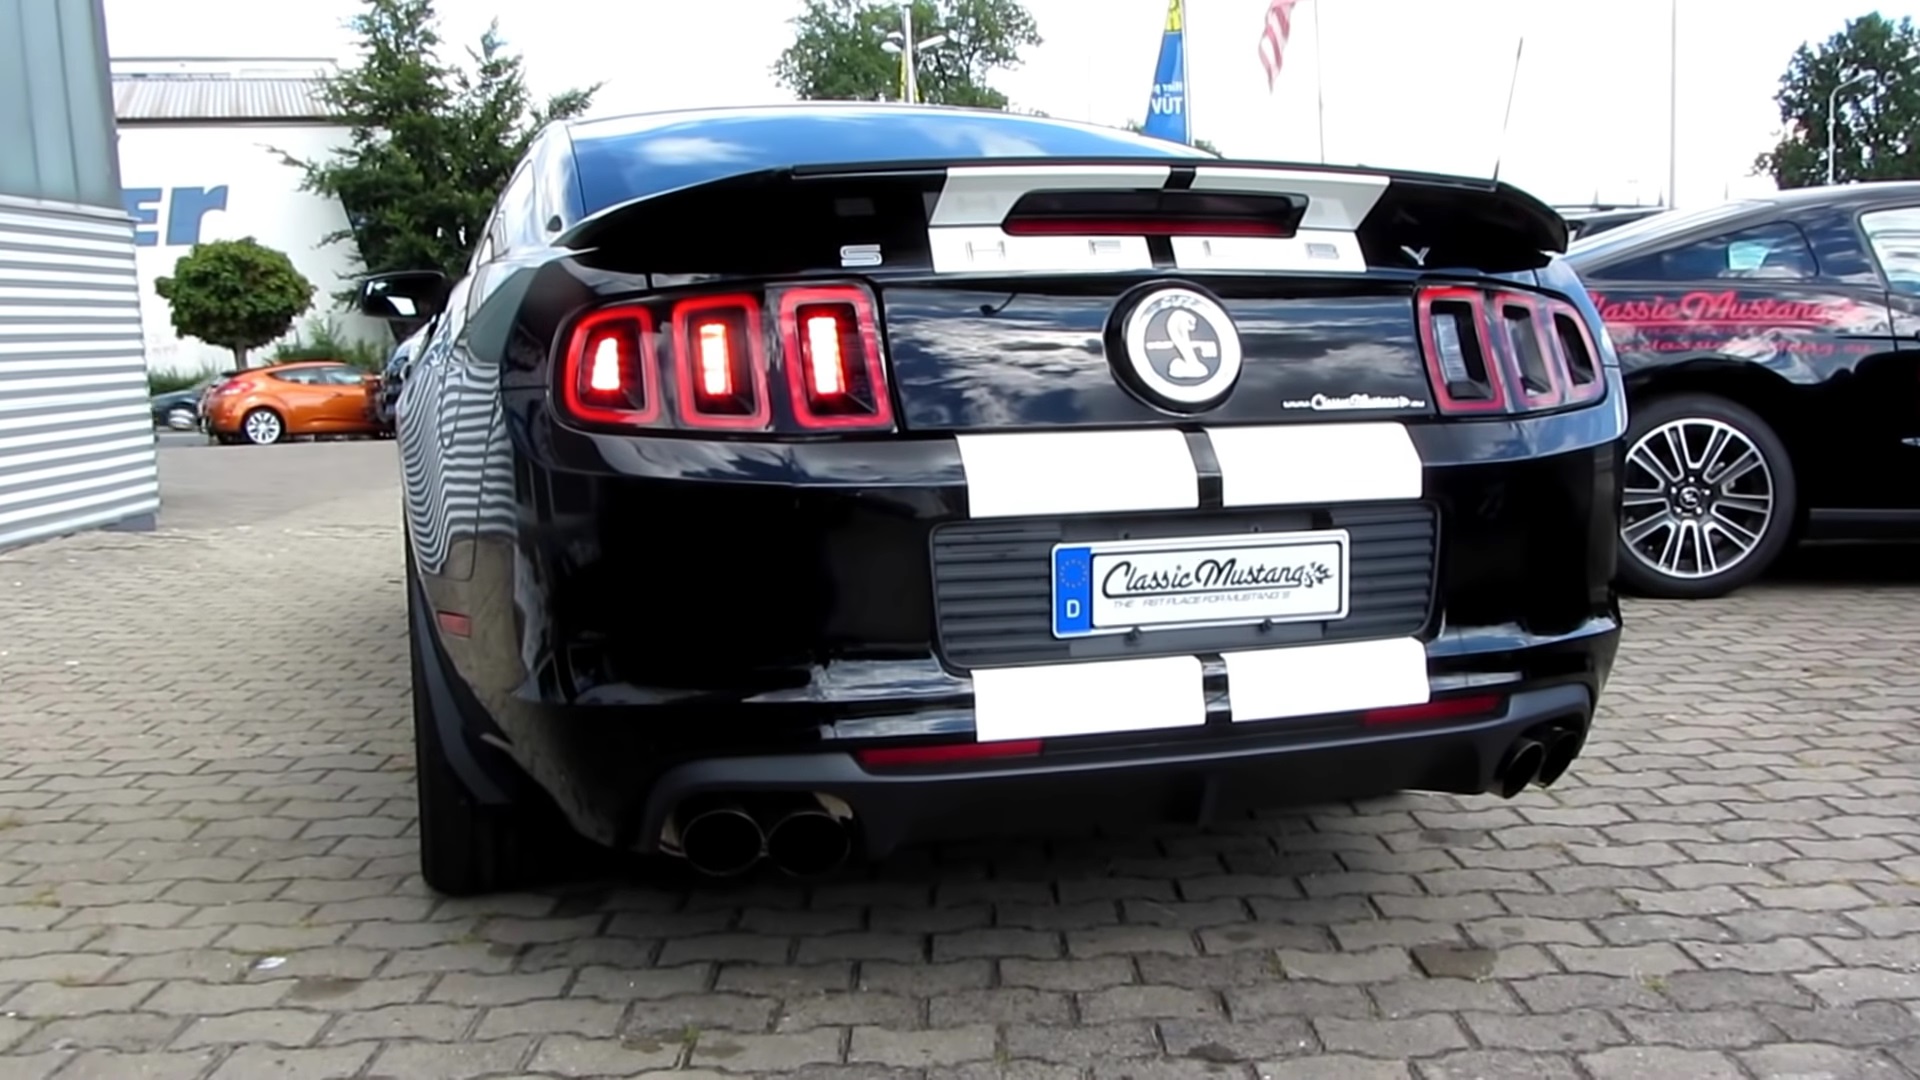 Video: 2013 Ford Mustang Shelby GT500 Walkaround